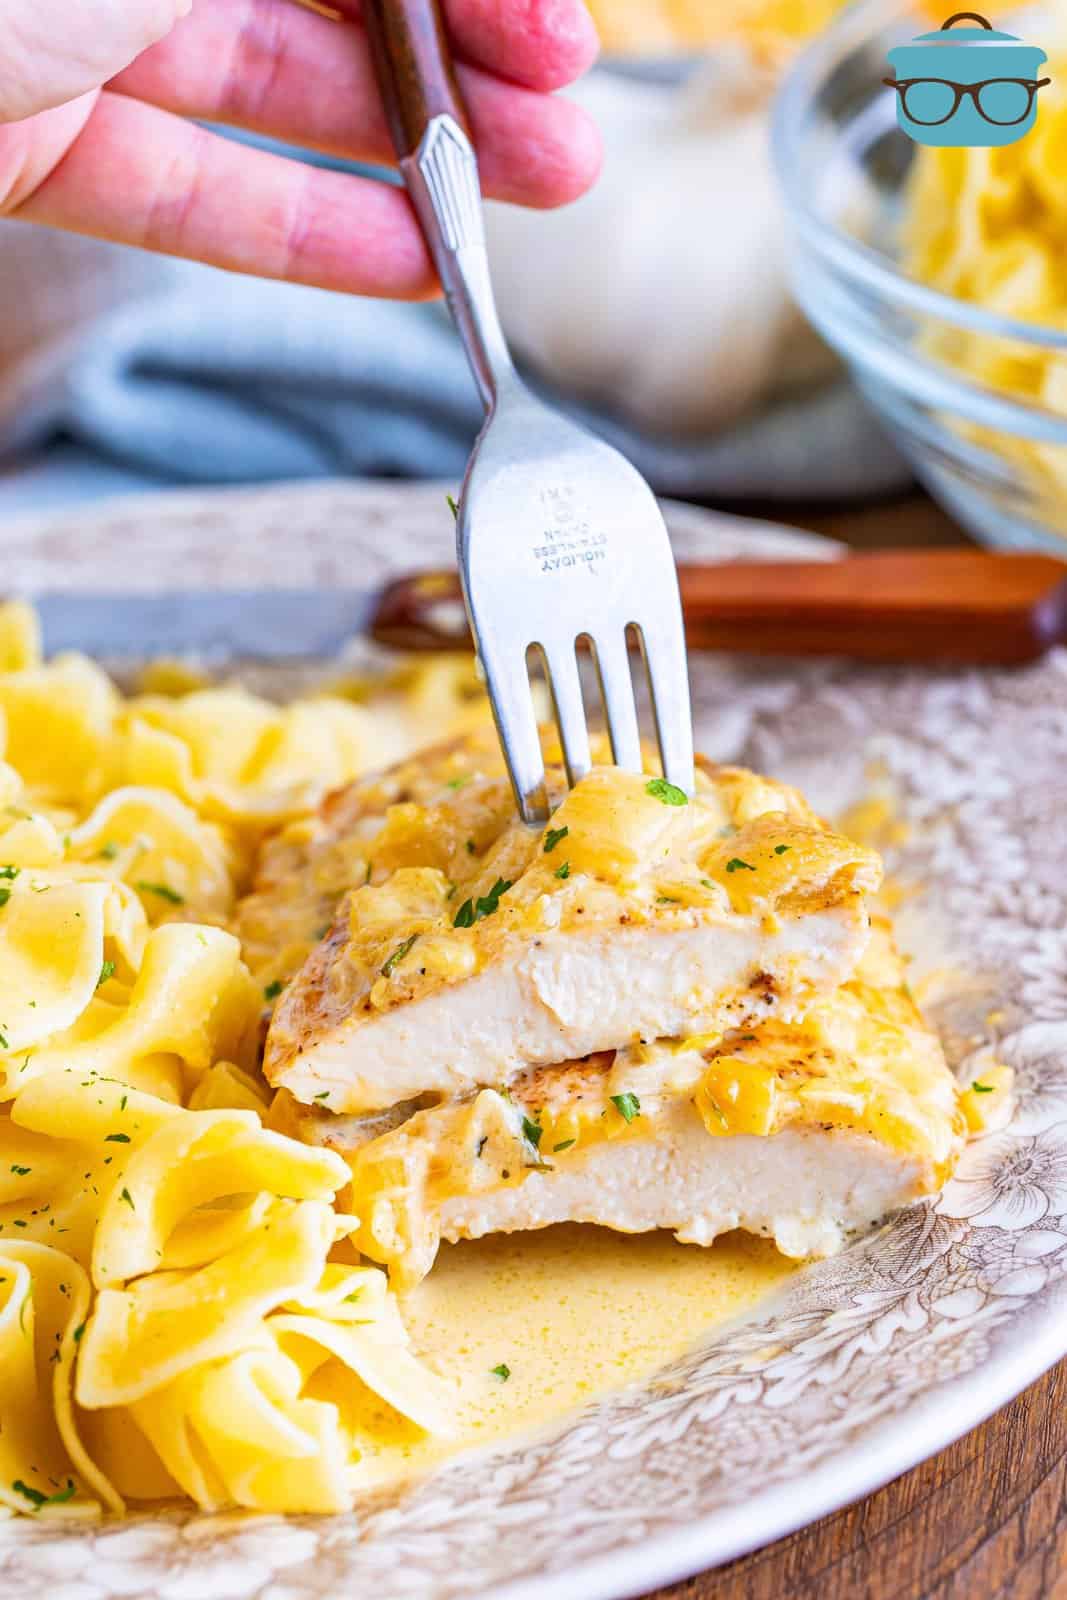 A fork holding a sliced piece of Creamy Garlic Chicken with pasta.